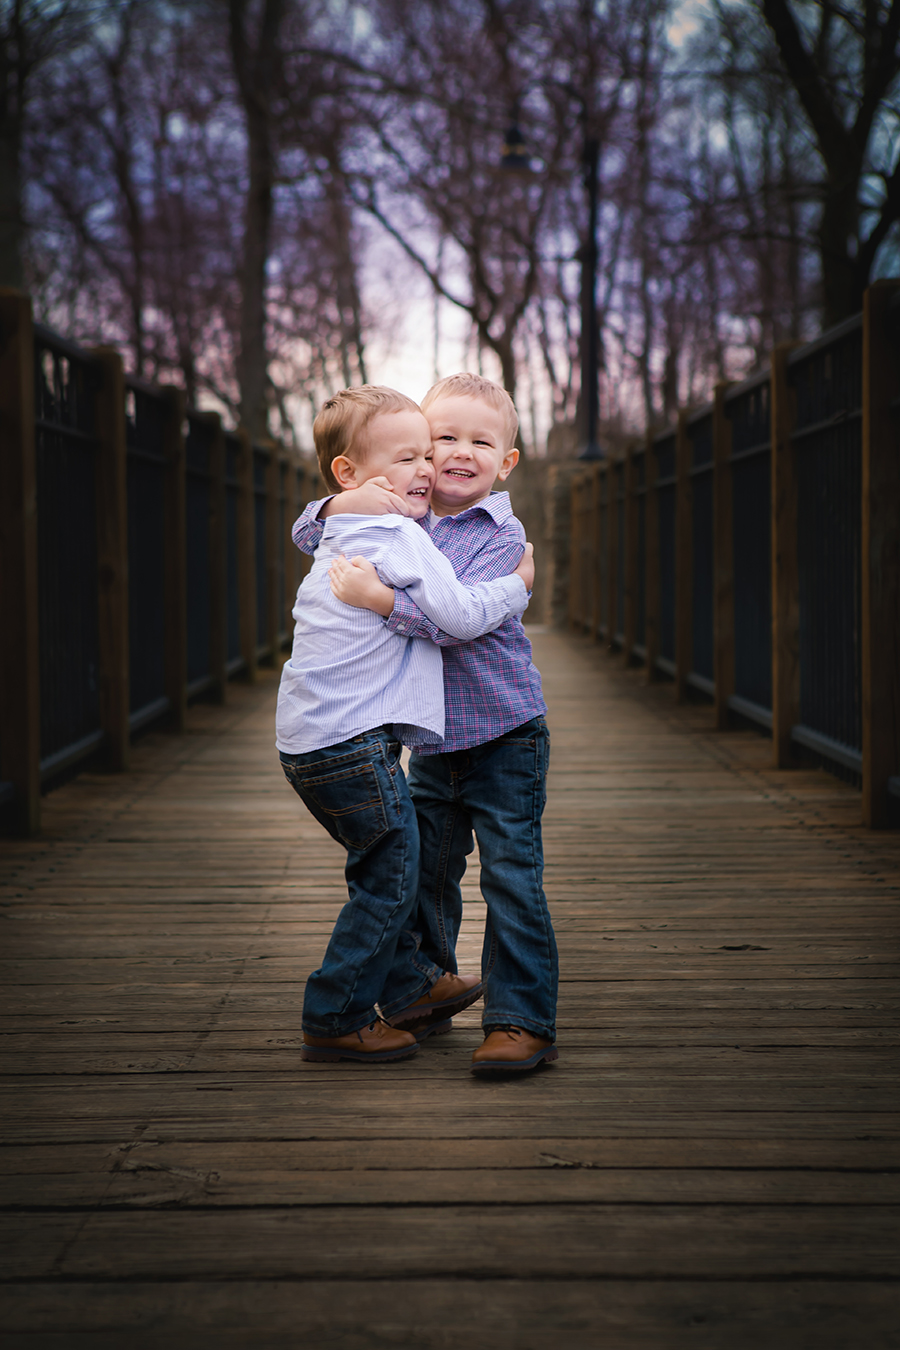 Brothers hugging each other